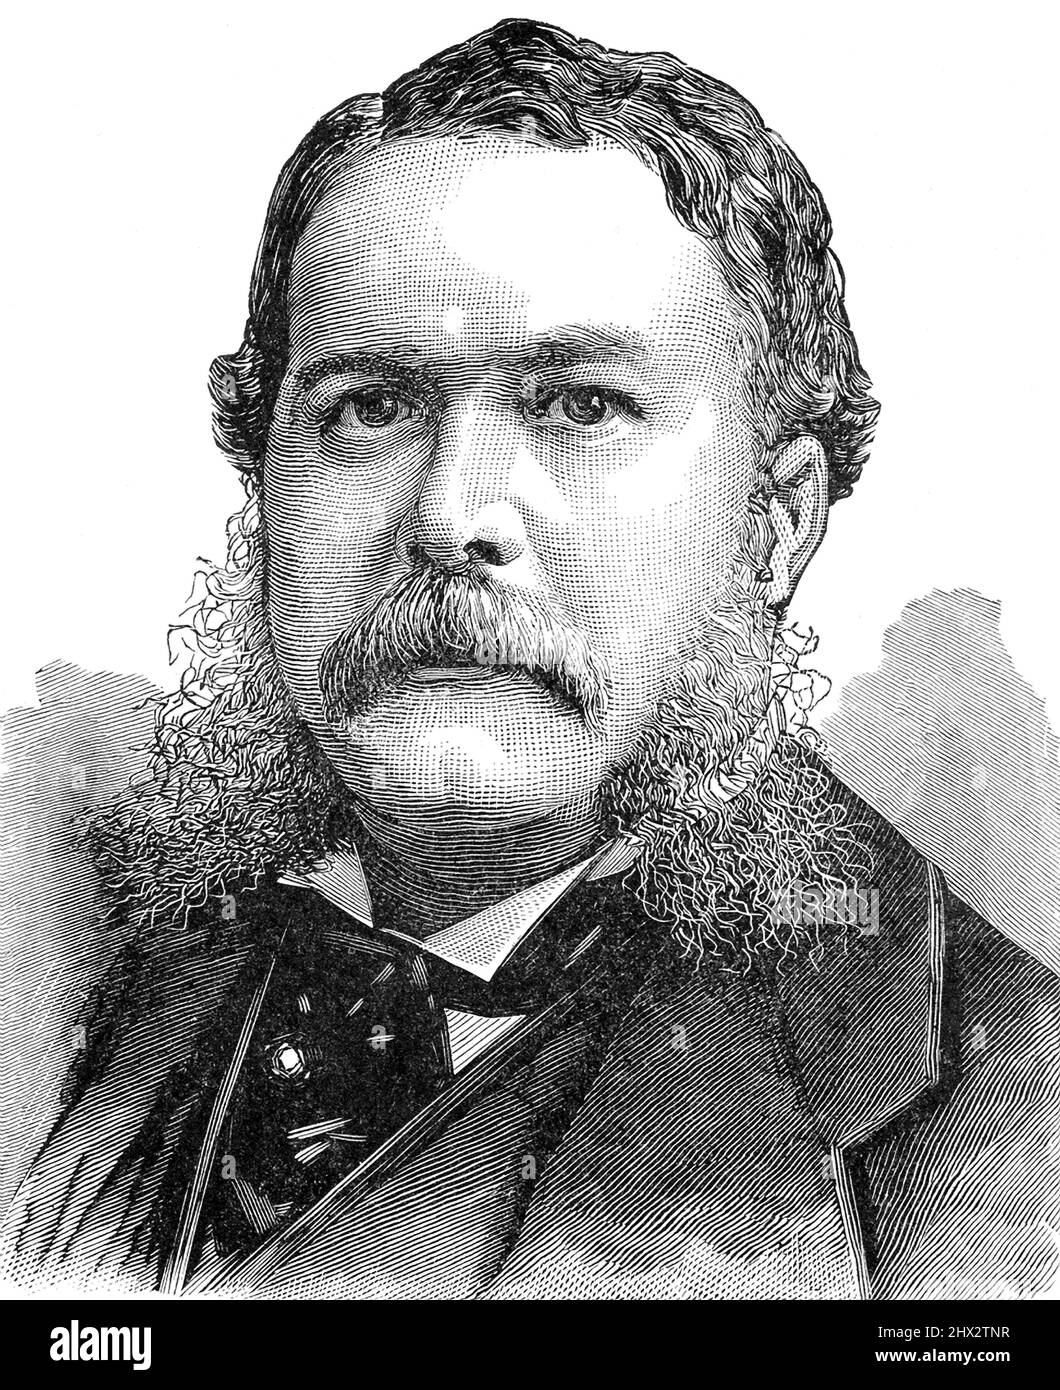 Chester Alan Arthur 1830 1886 Was Elected The 21st President Of The